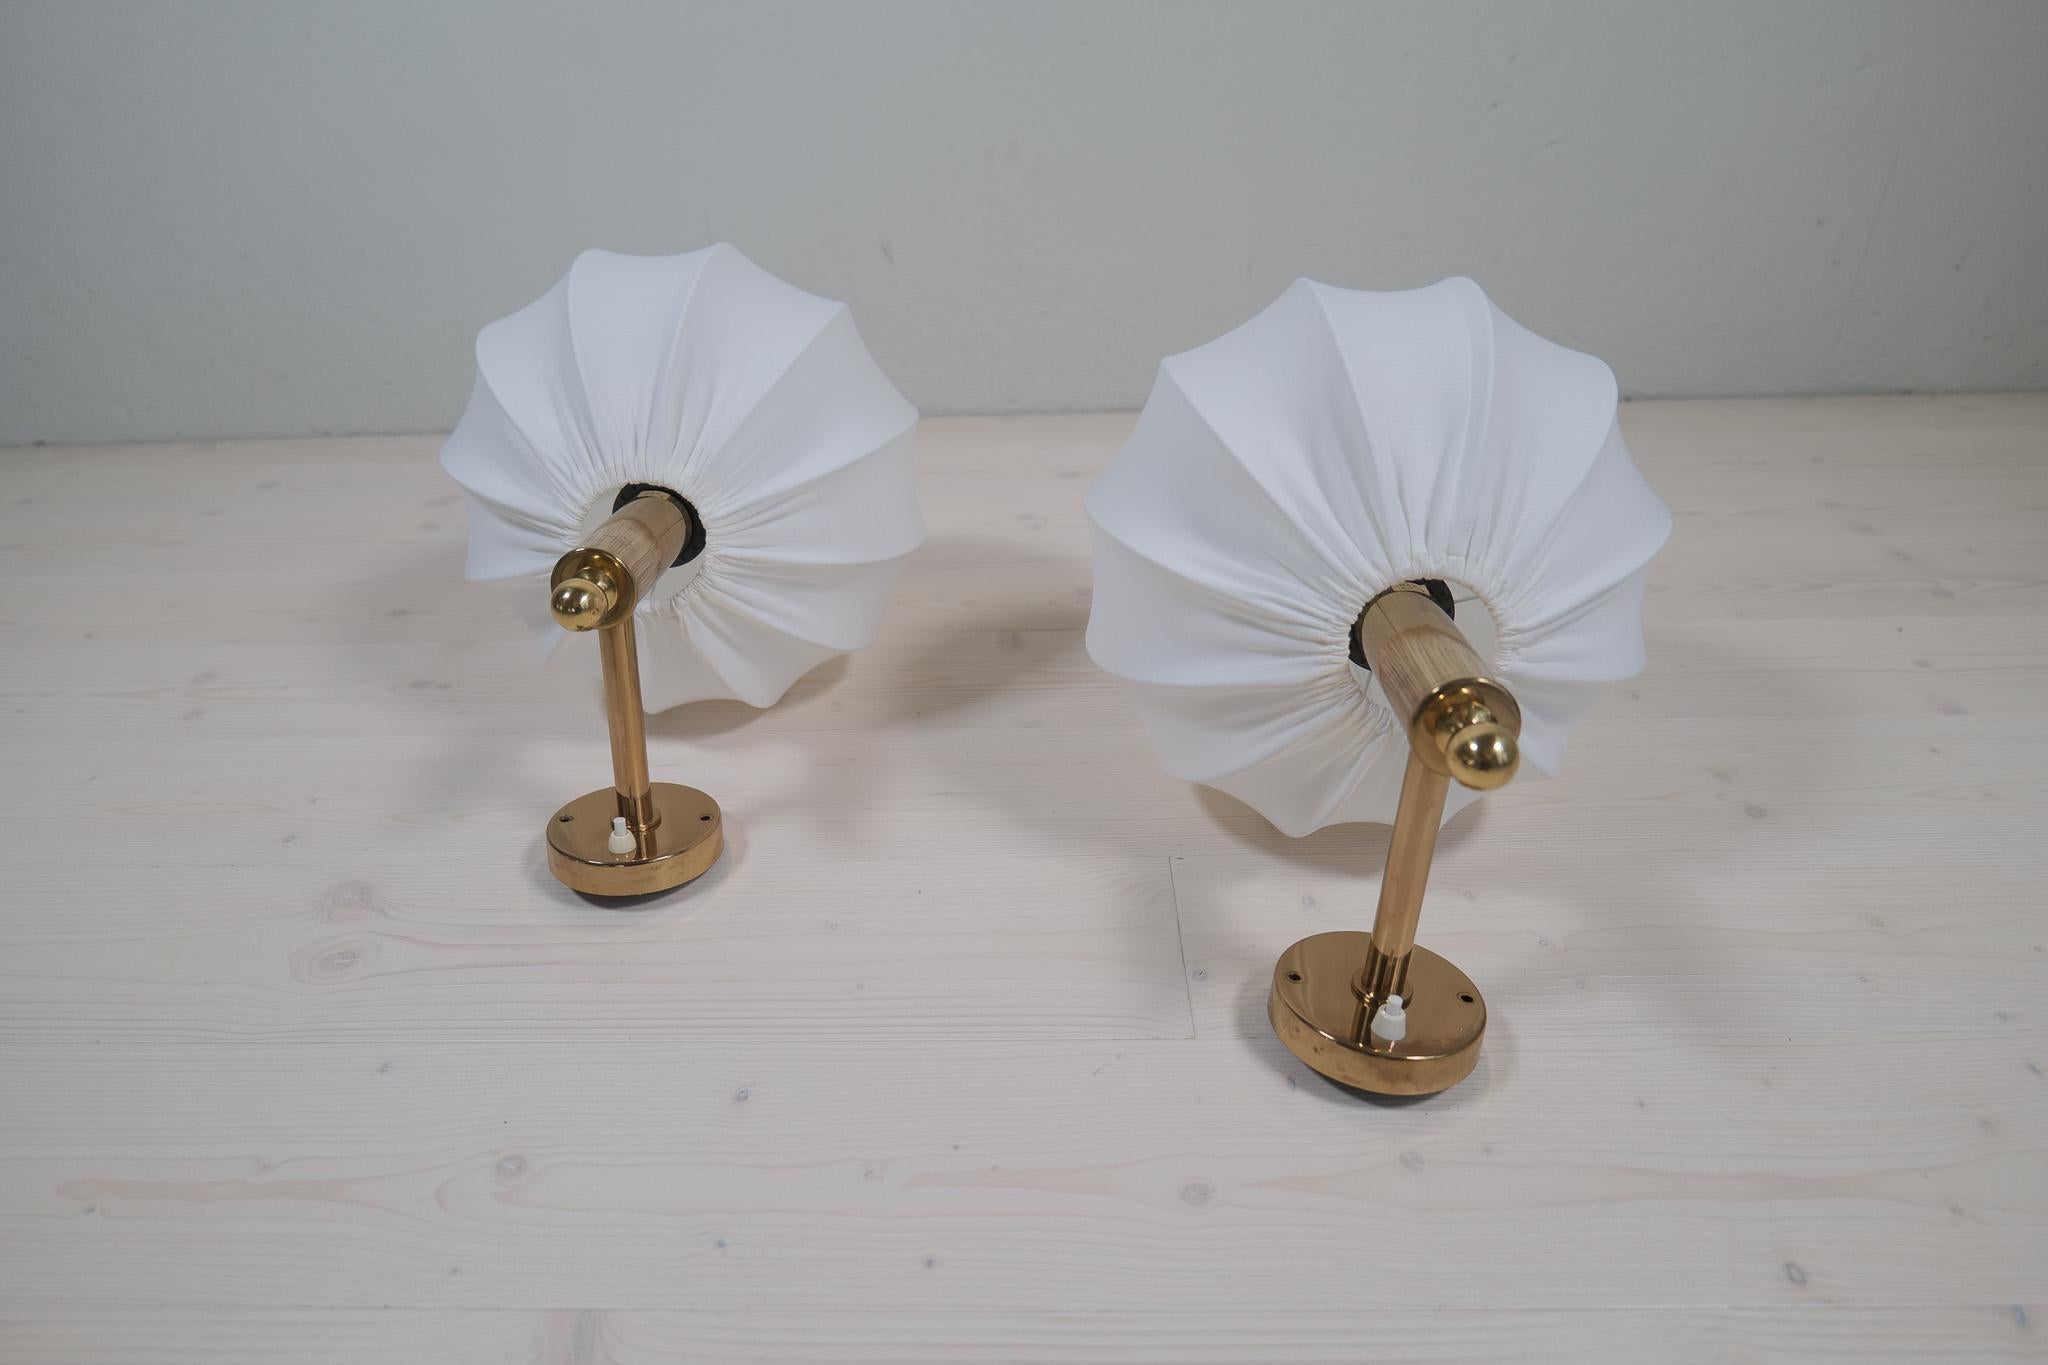 Swedish Midcentury Modern Brass Wall Lights with Cotton shades, Sweden, 1960s